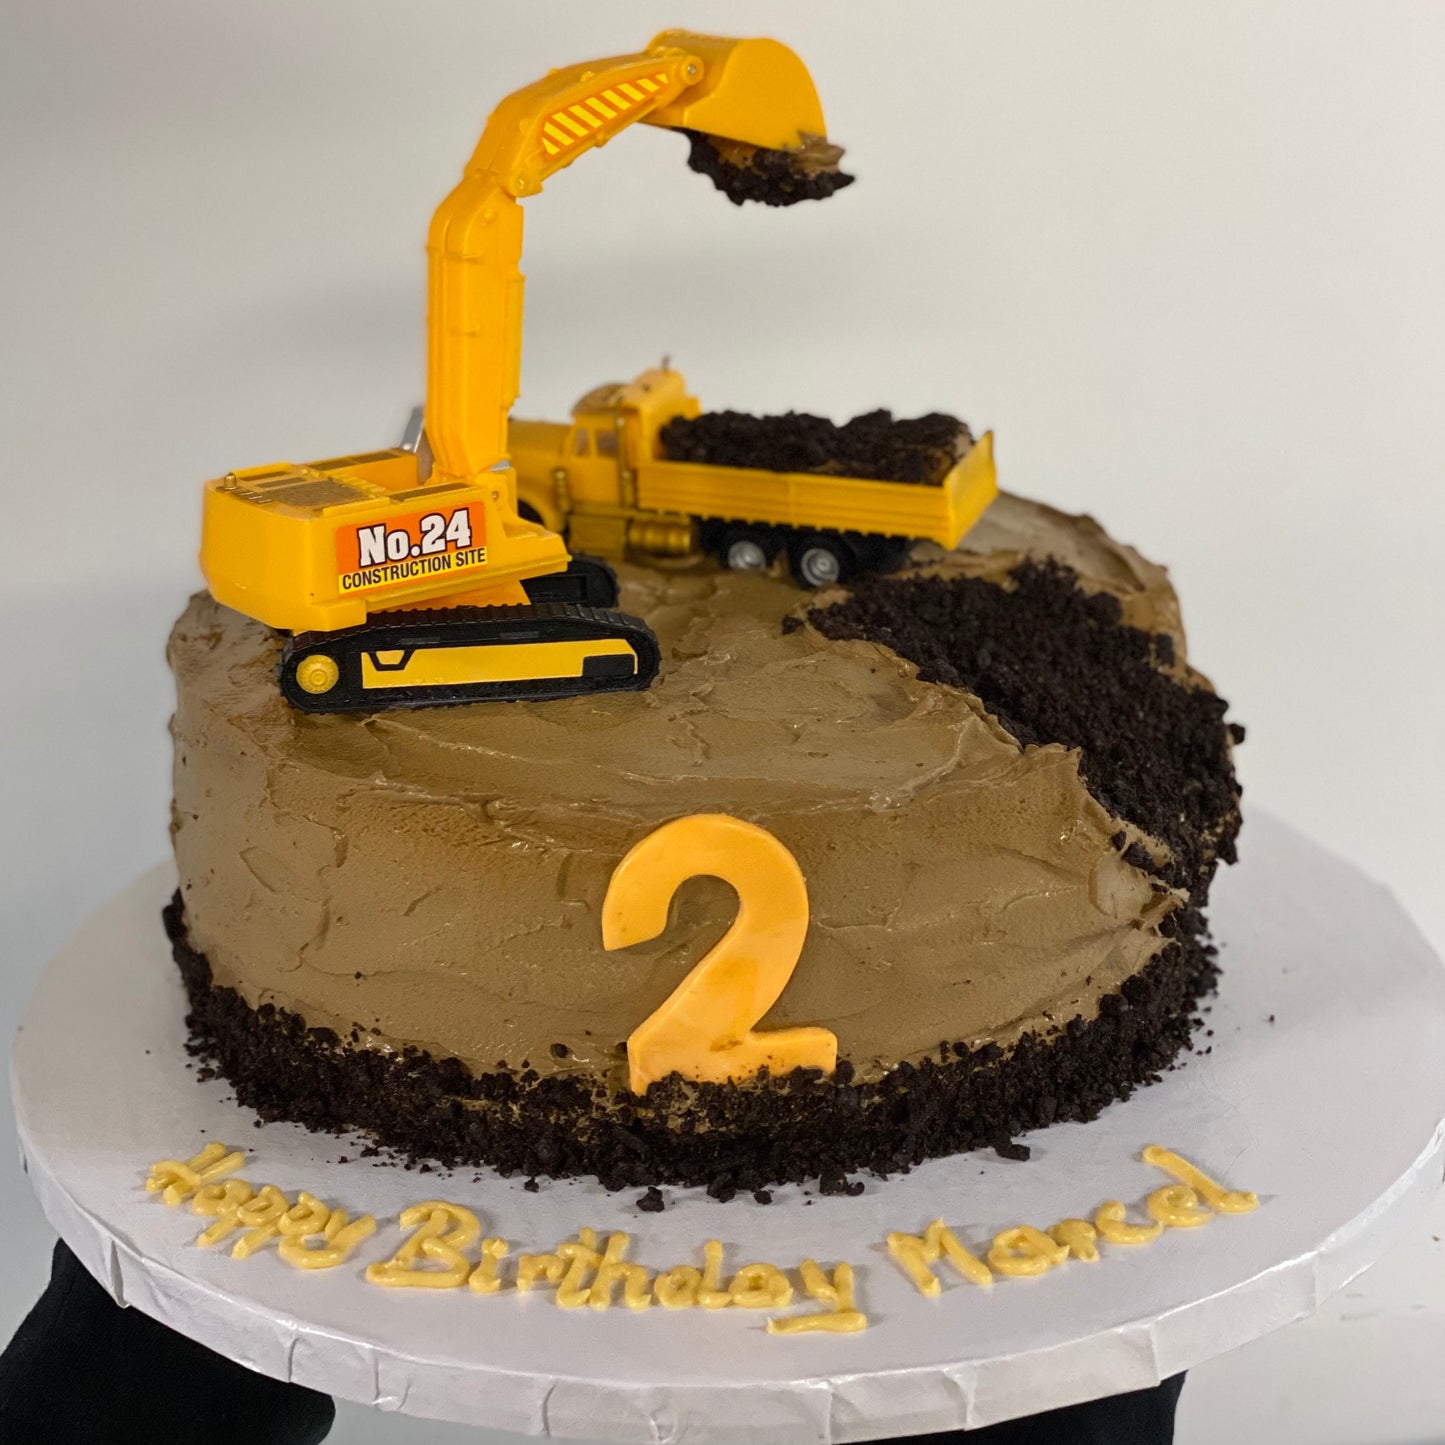 Chocolate construction themed cake for child's birthday with excavator on top